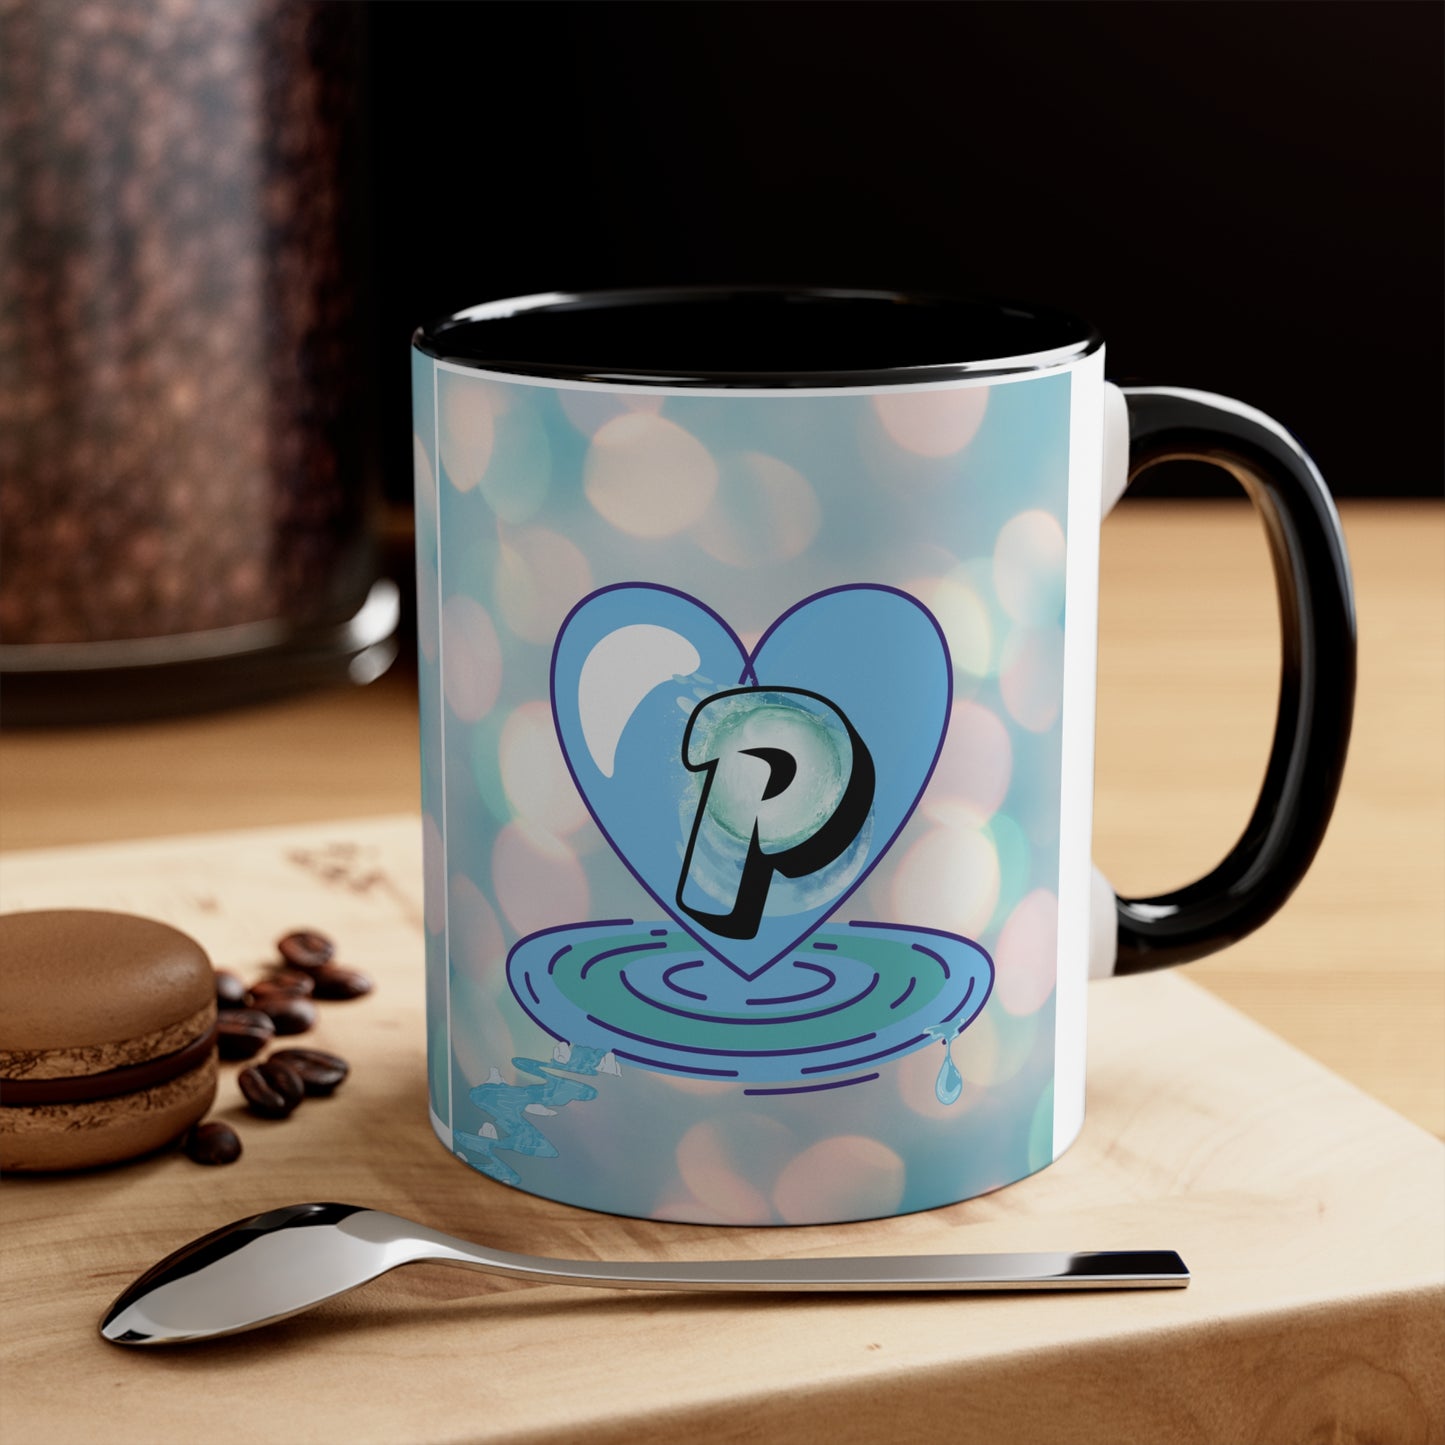 Personalized Coffee Mug: Enjoy every sip in style!,Celebrate your individuality with every coffee,The perfect gift for coffee lovers